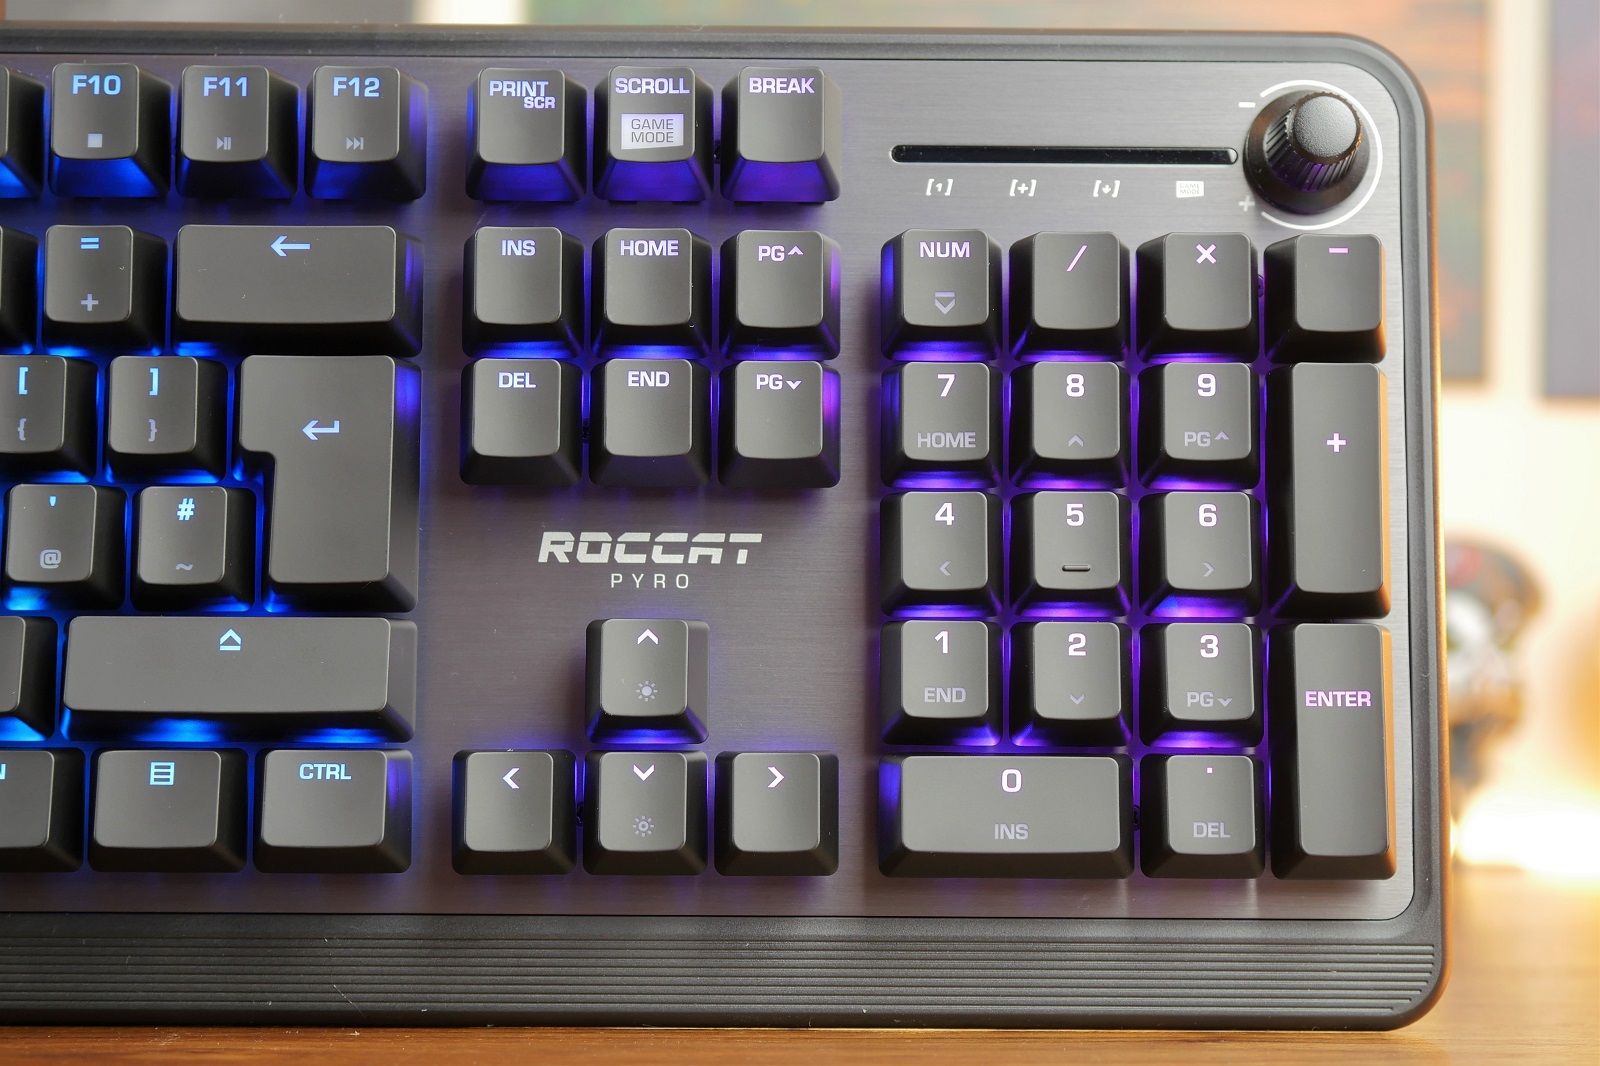 Roccat Pyro gaming keyboard review: An affordable mechanical keyboard with appeal photo 4